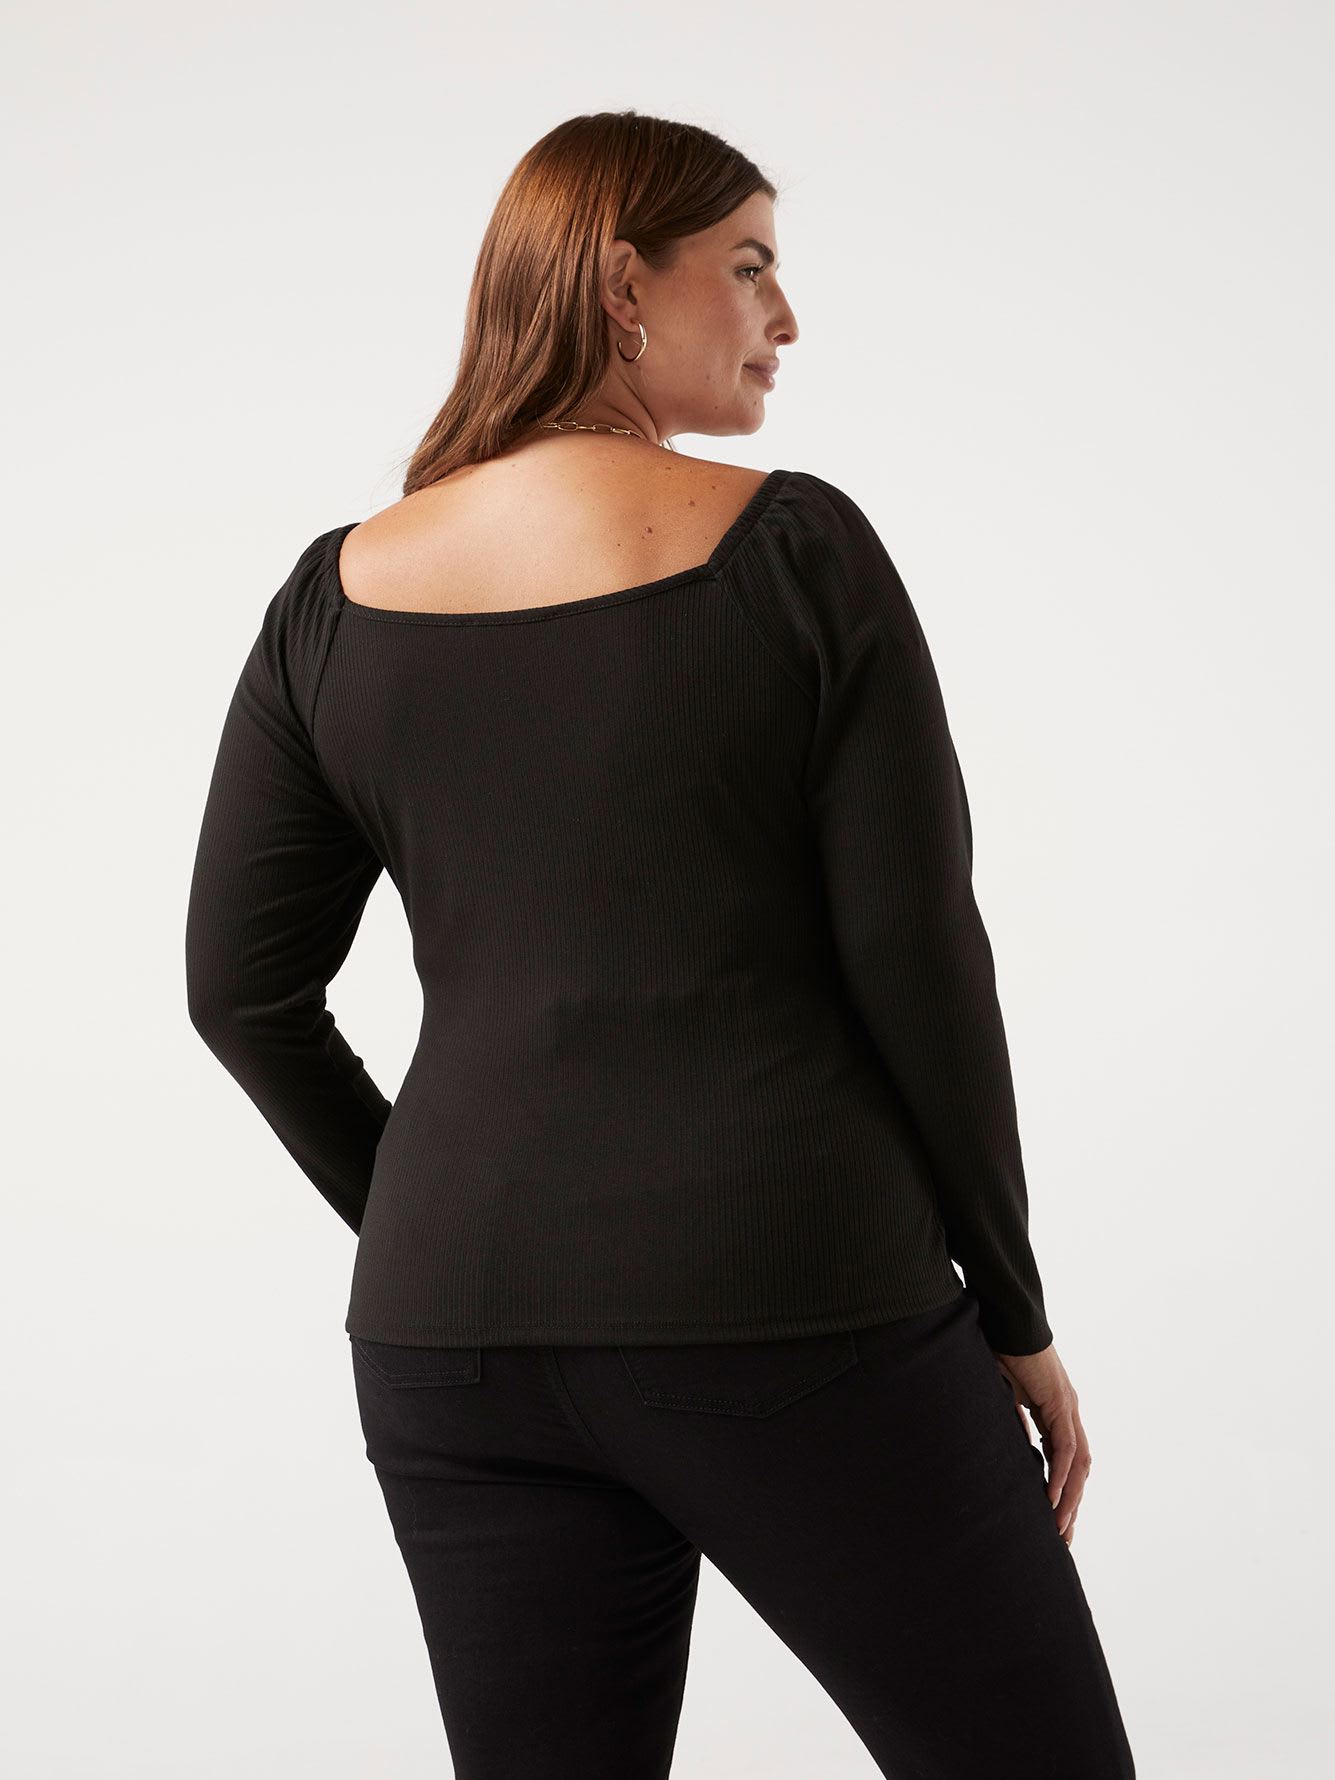 Empire Cut Top with Sweetheart Neckline - Addition Elle | Penningtons